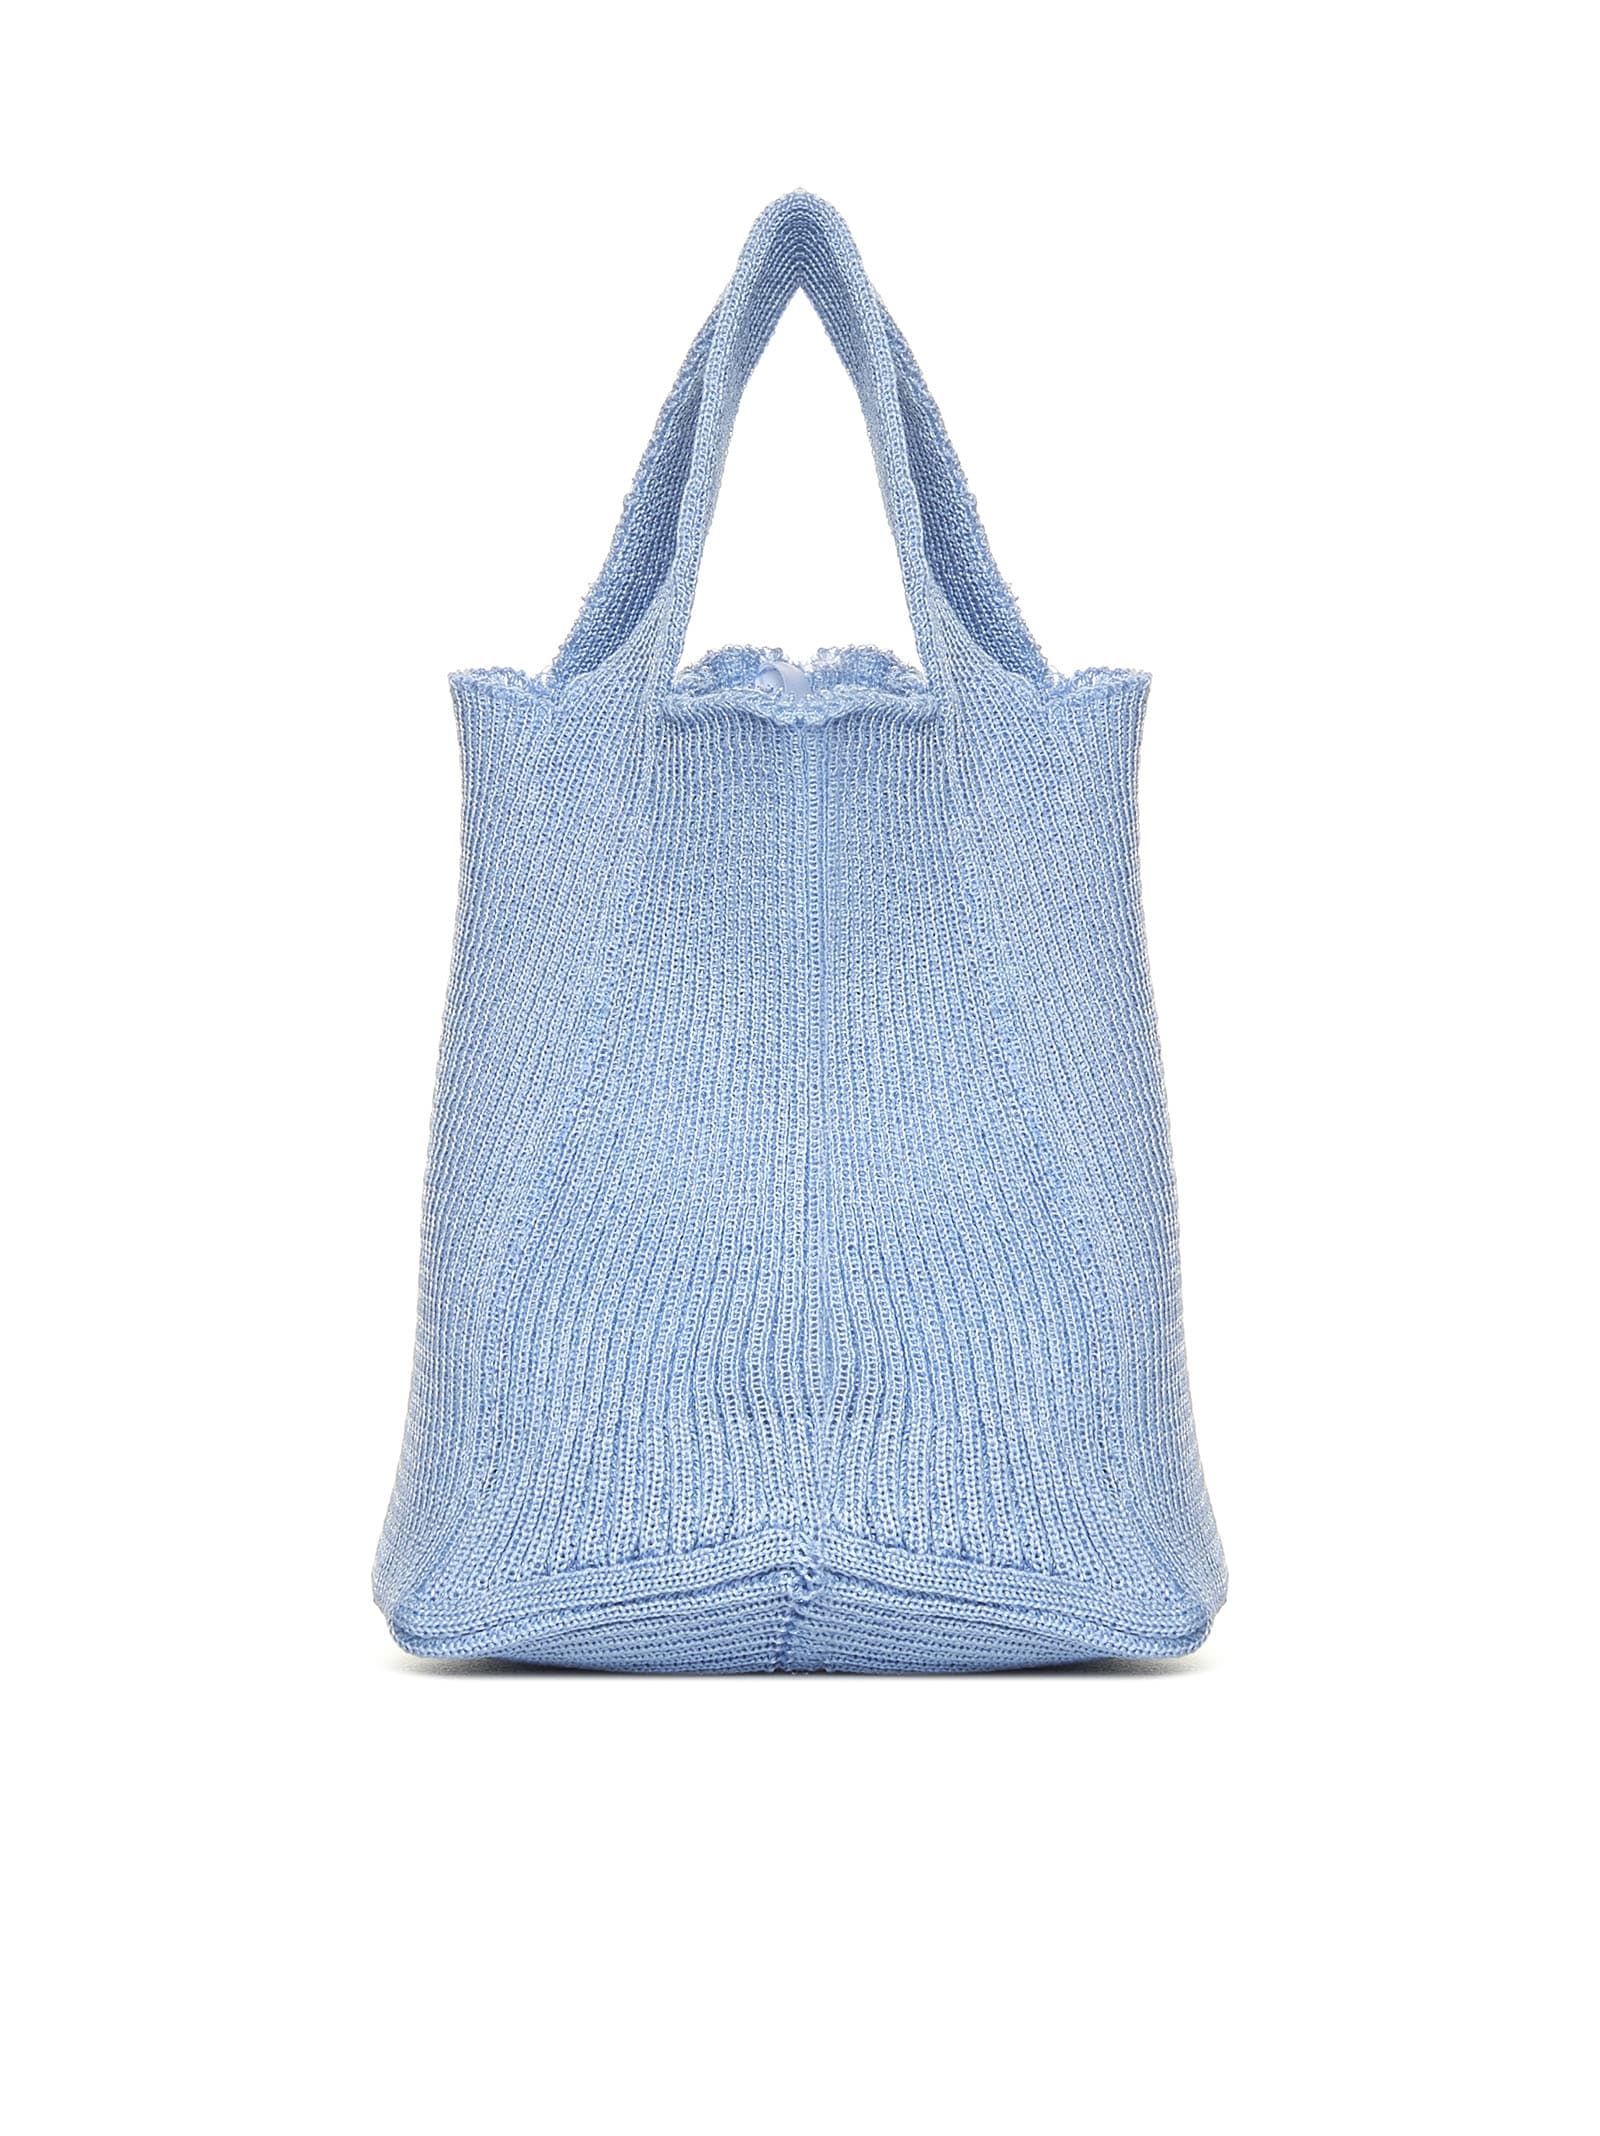 A. Roege Hove Tote In Icy Blue